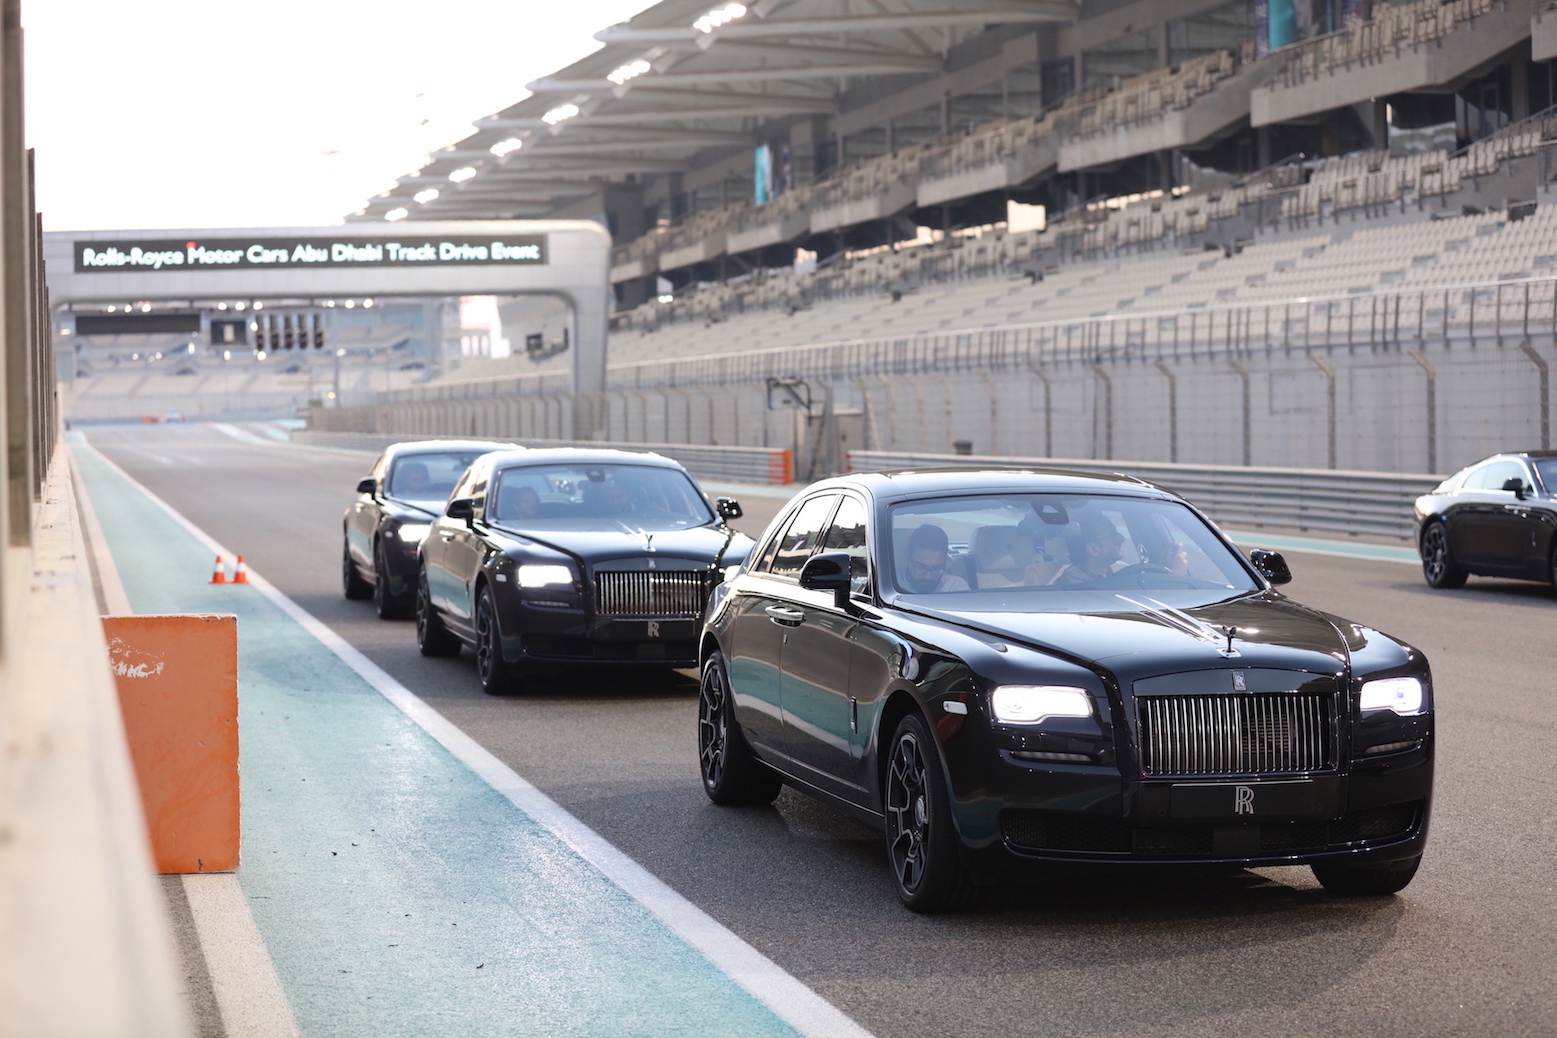 The Rolls-Royce Dawn Black Badge Marks the New Chapter of the Black Badge Series